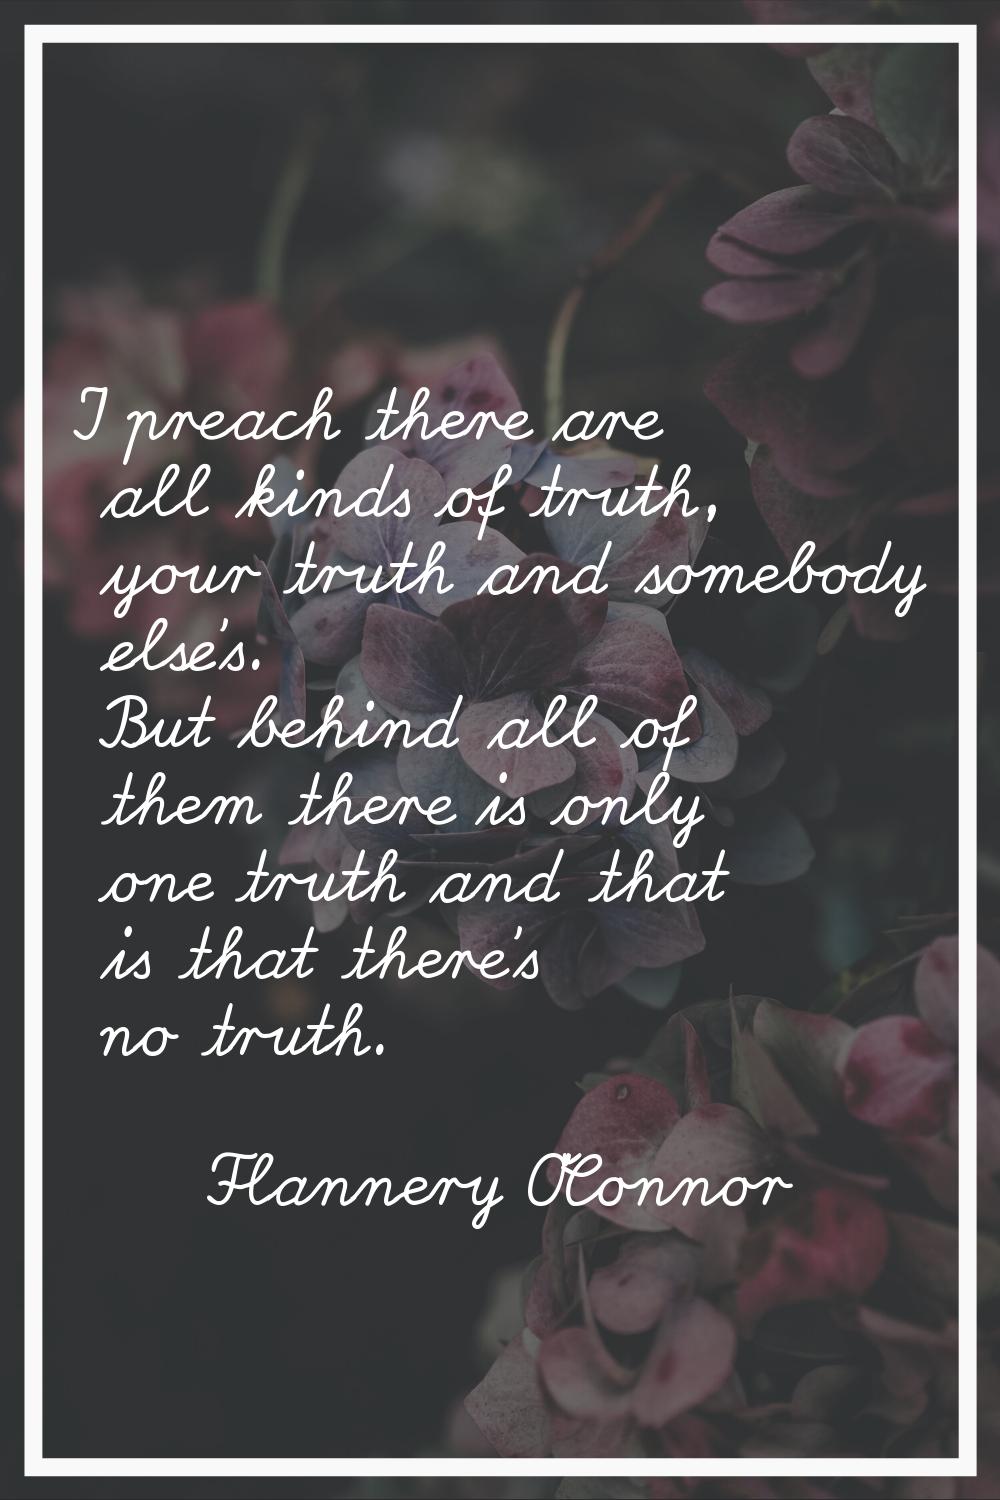 I preach there are all kinds of truth, your truth and somebody else's. But behind all of them there